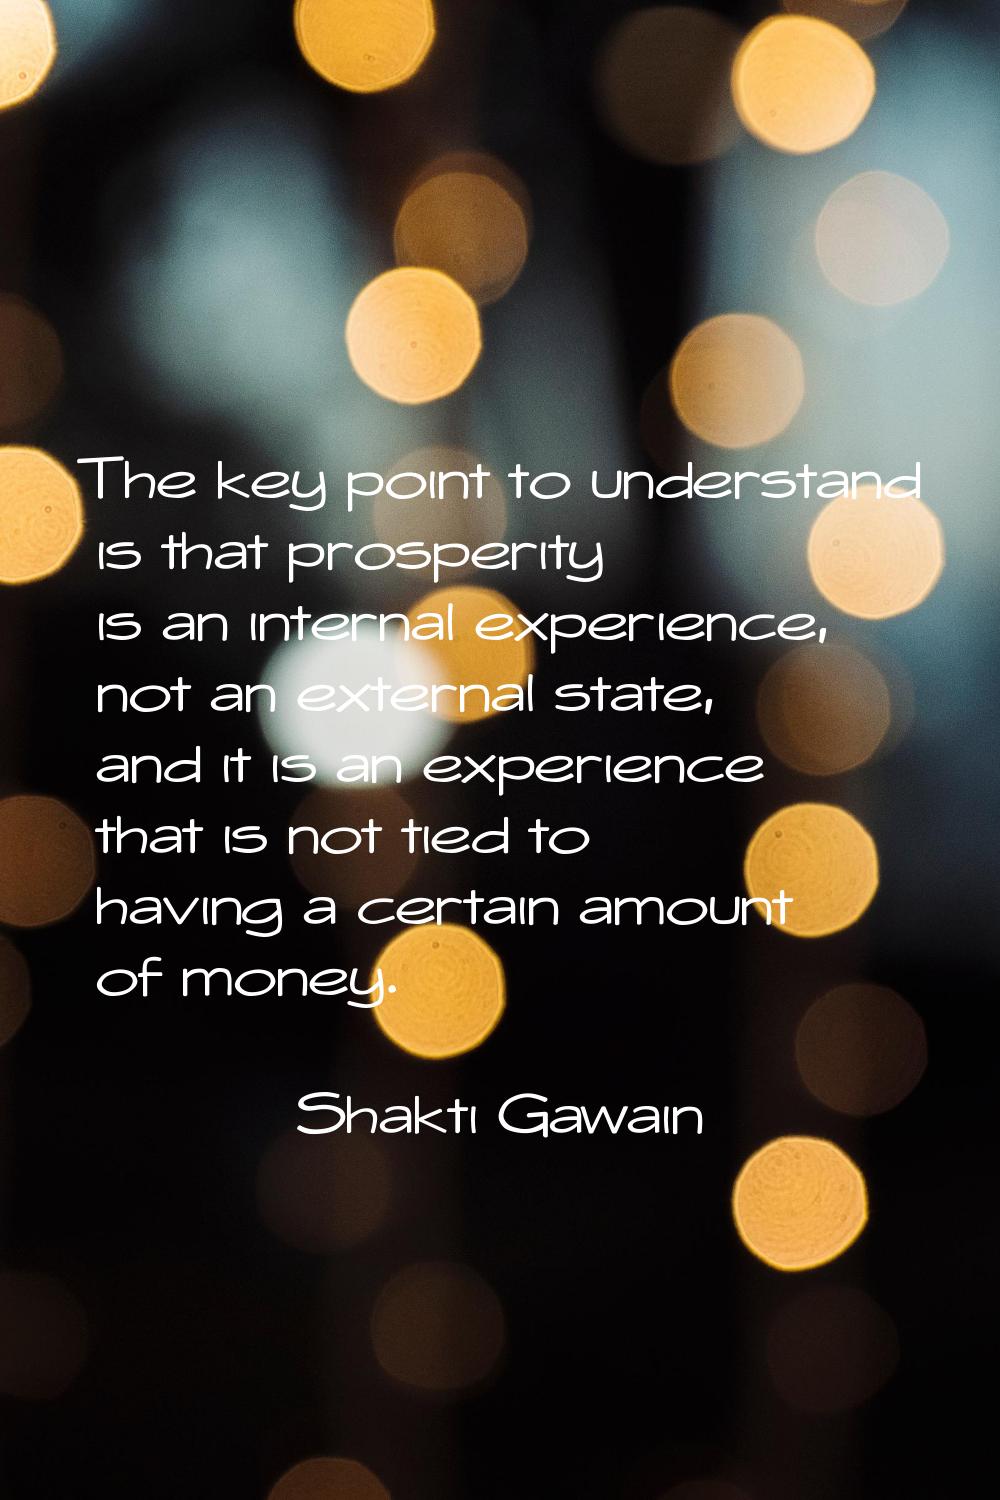 The key point to understand is that prosperity is an internal experience, not an external state, an